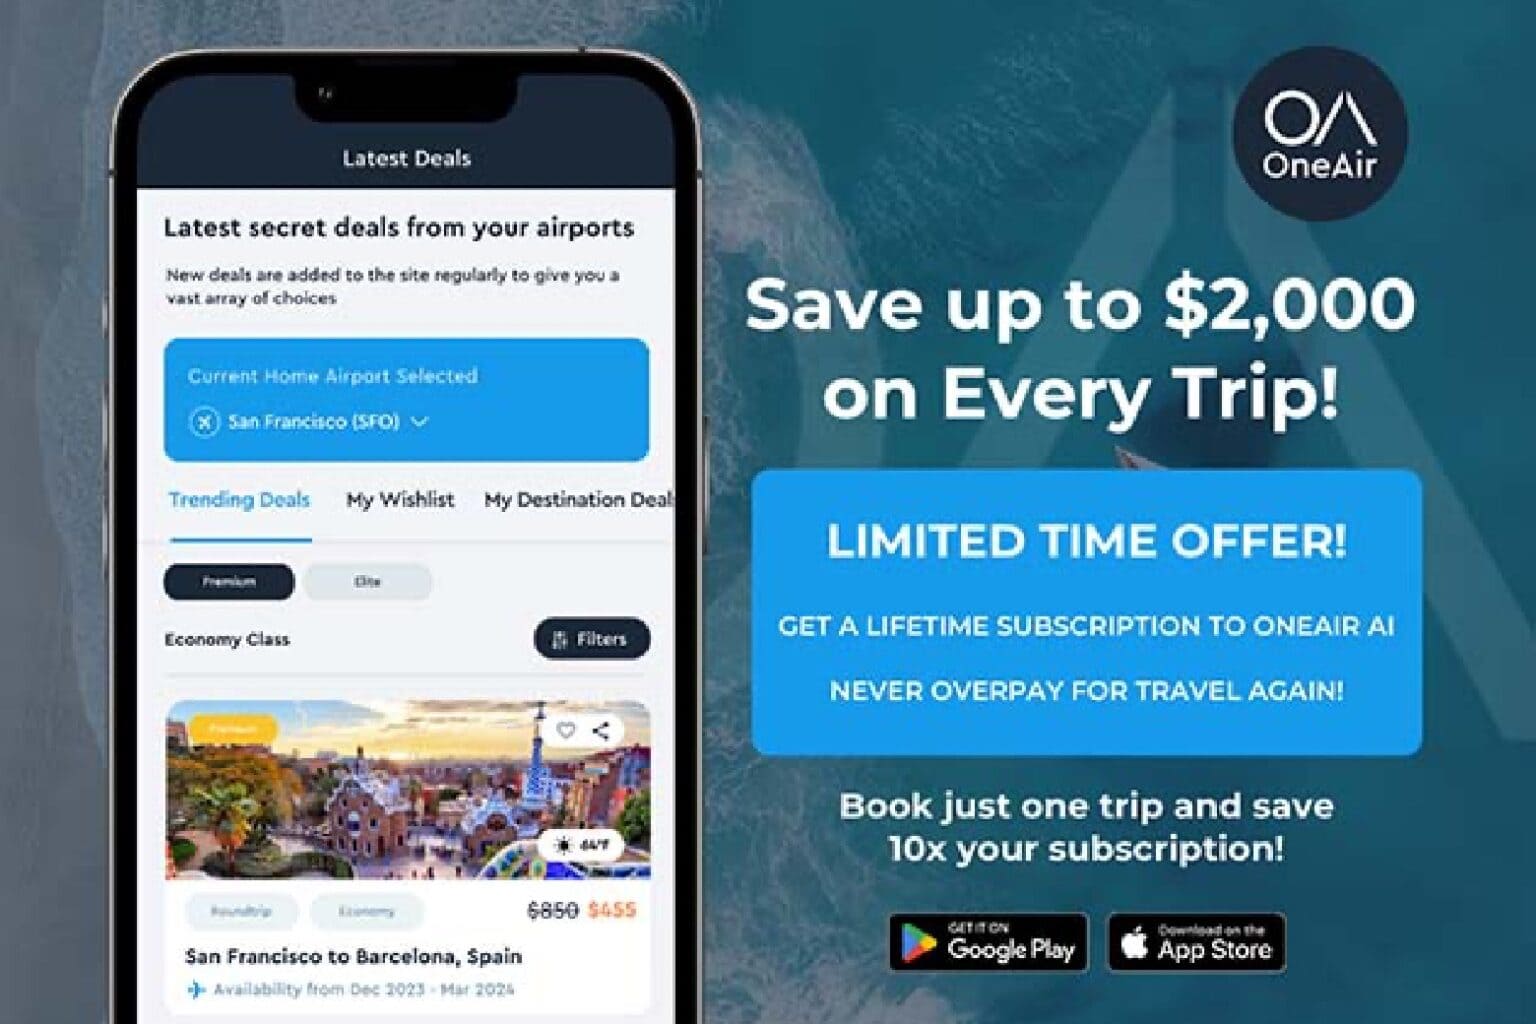 Take $30 off this AI travel app to get cheap flights and more for life.